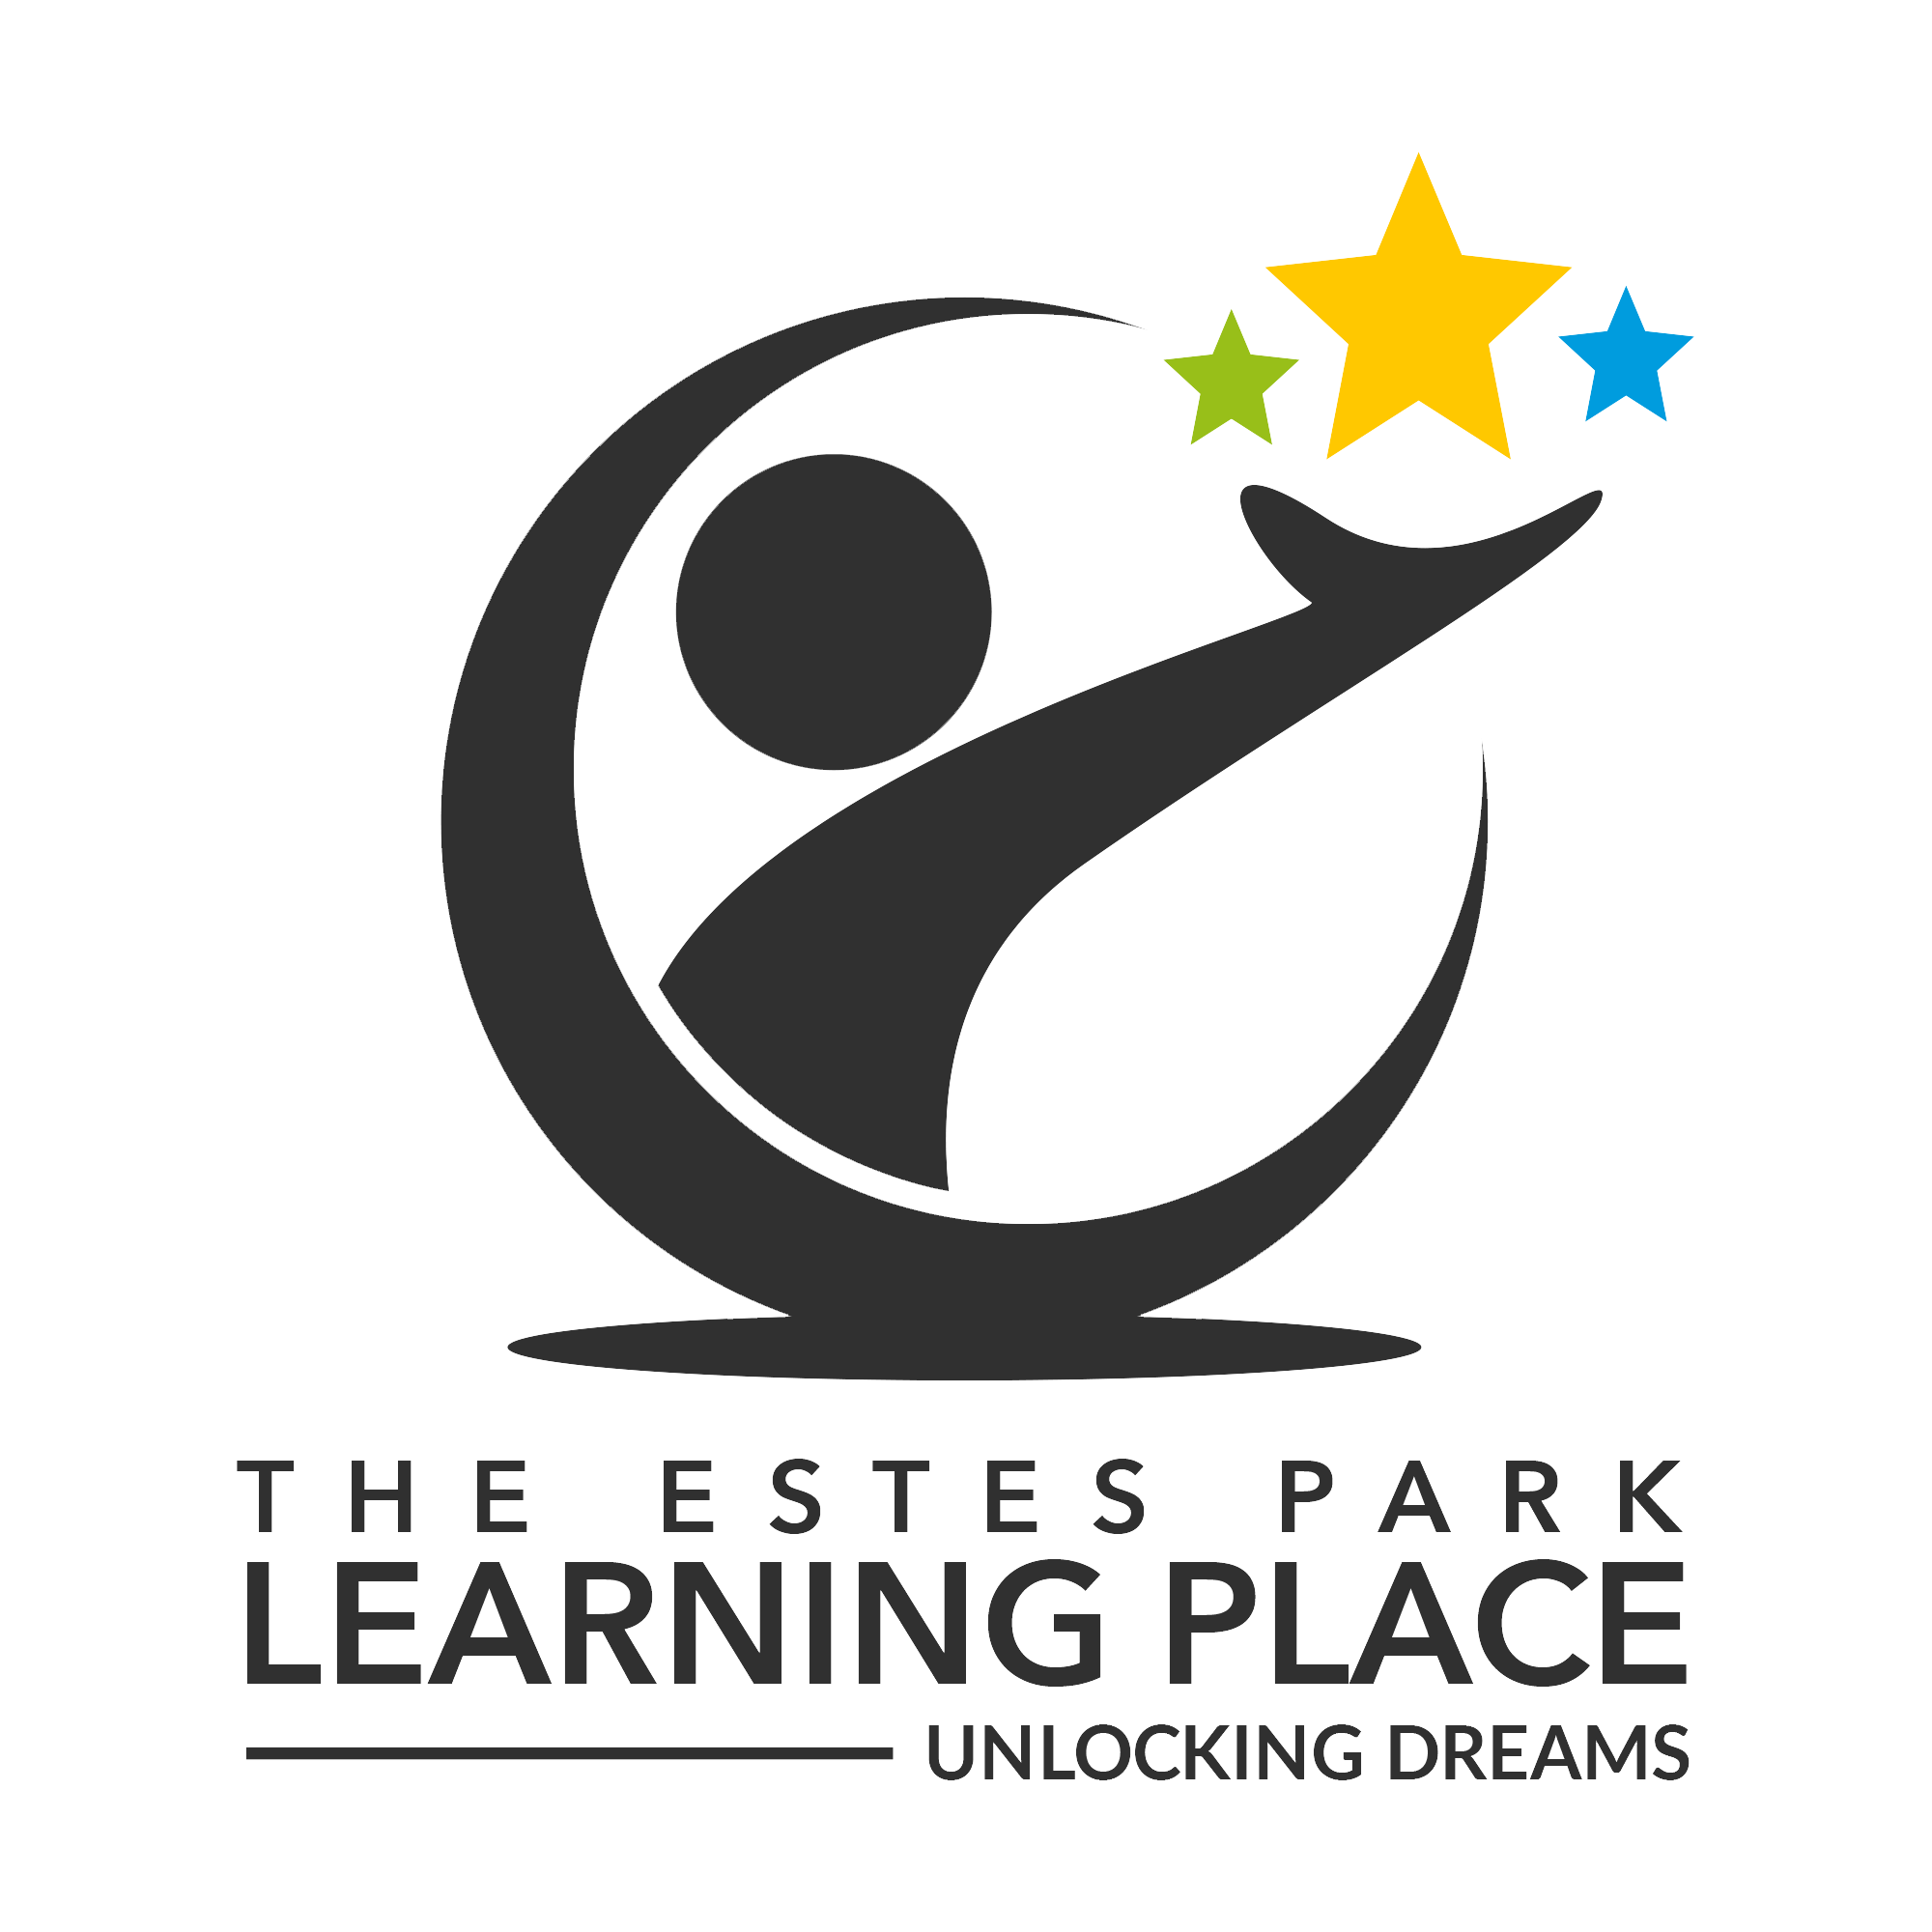 The Learning Place Logo